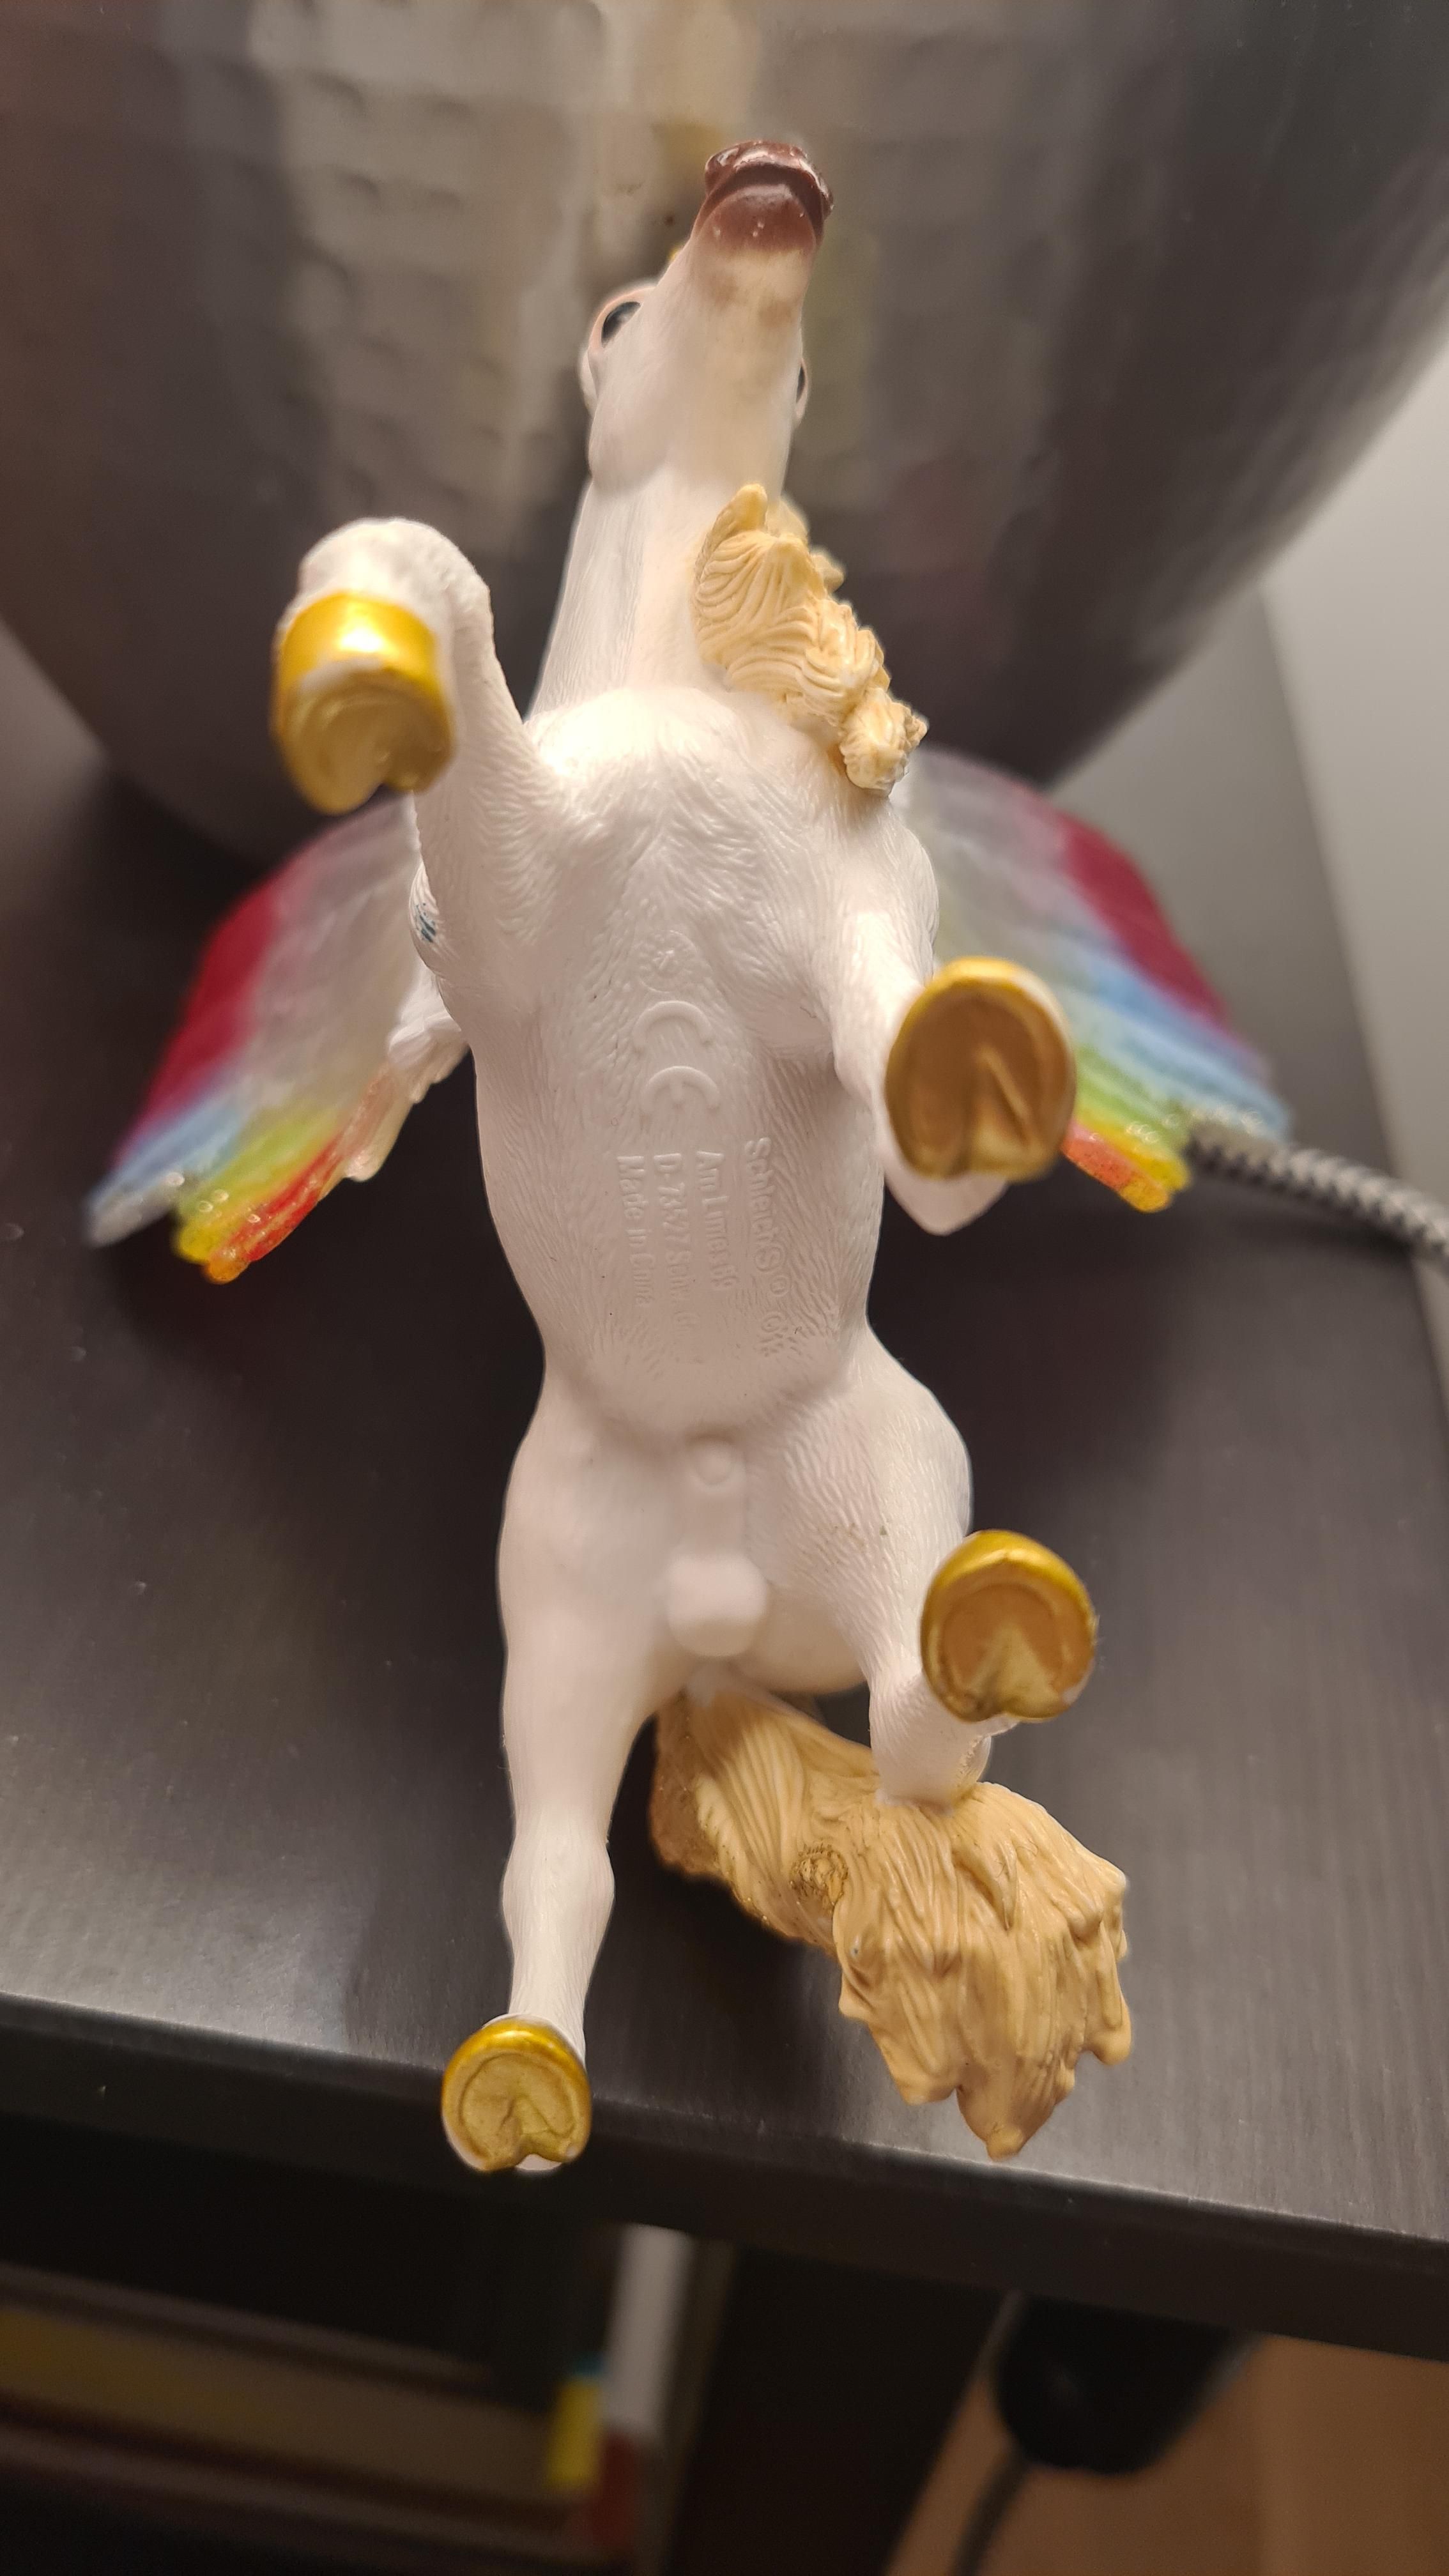 I see your well hung giraffe with my daughters unicorn!